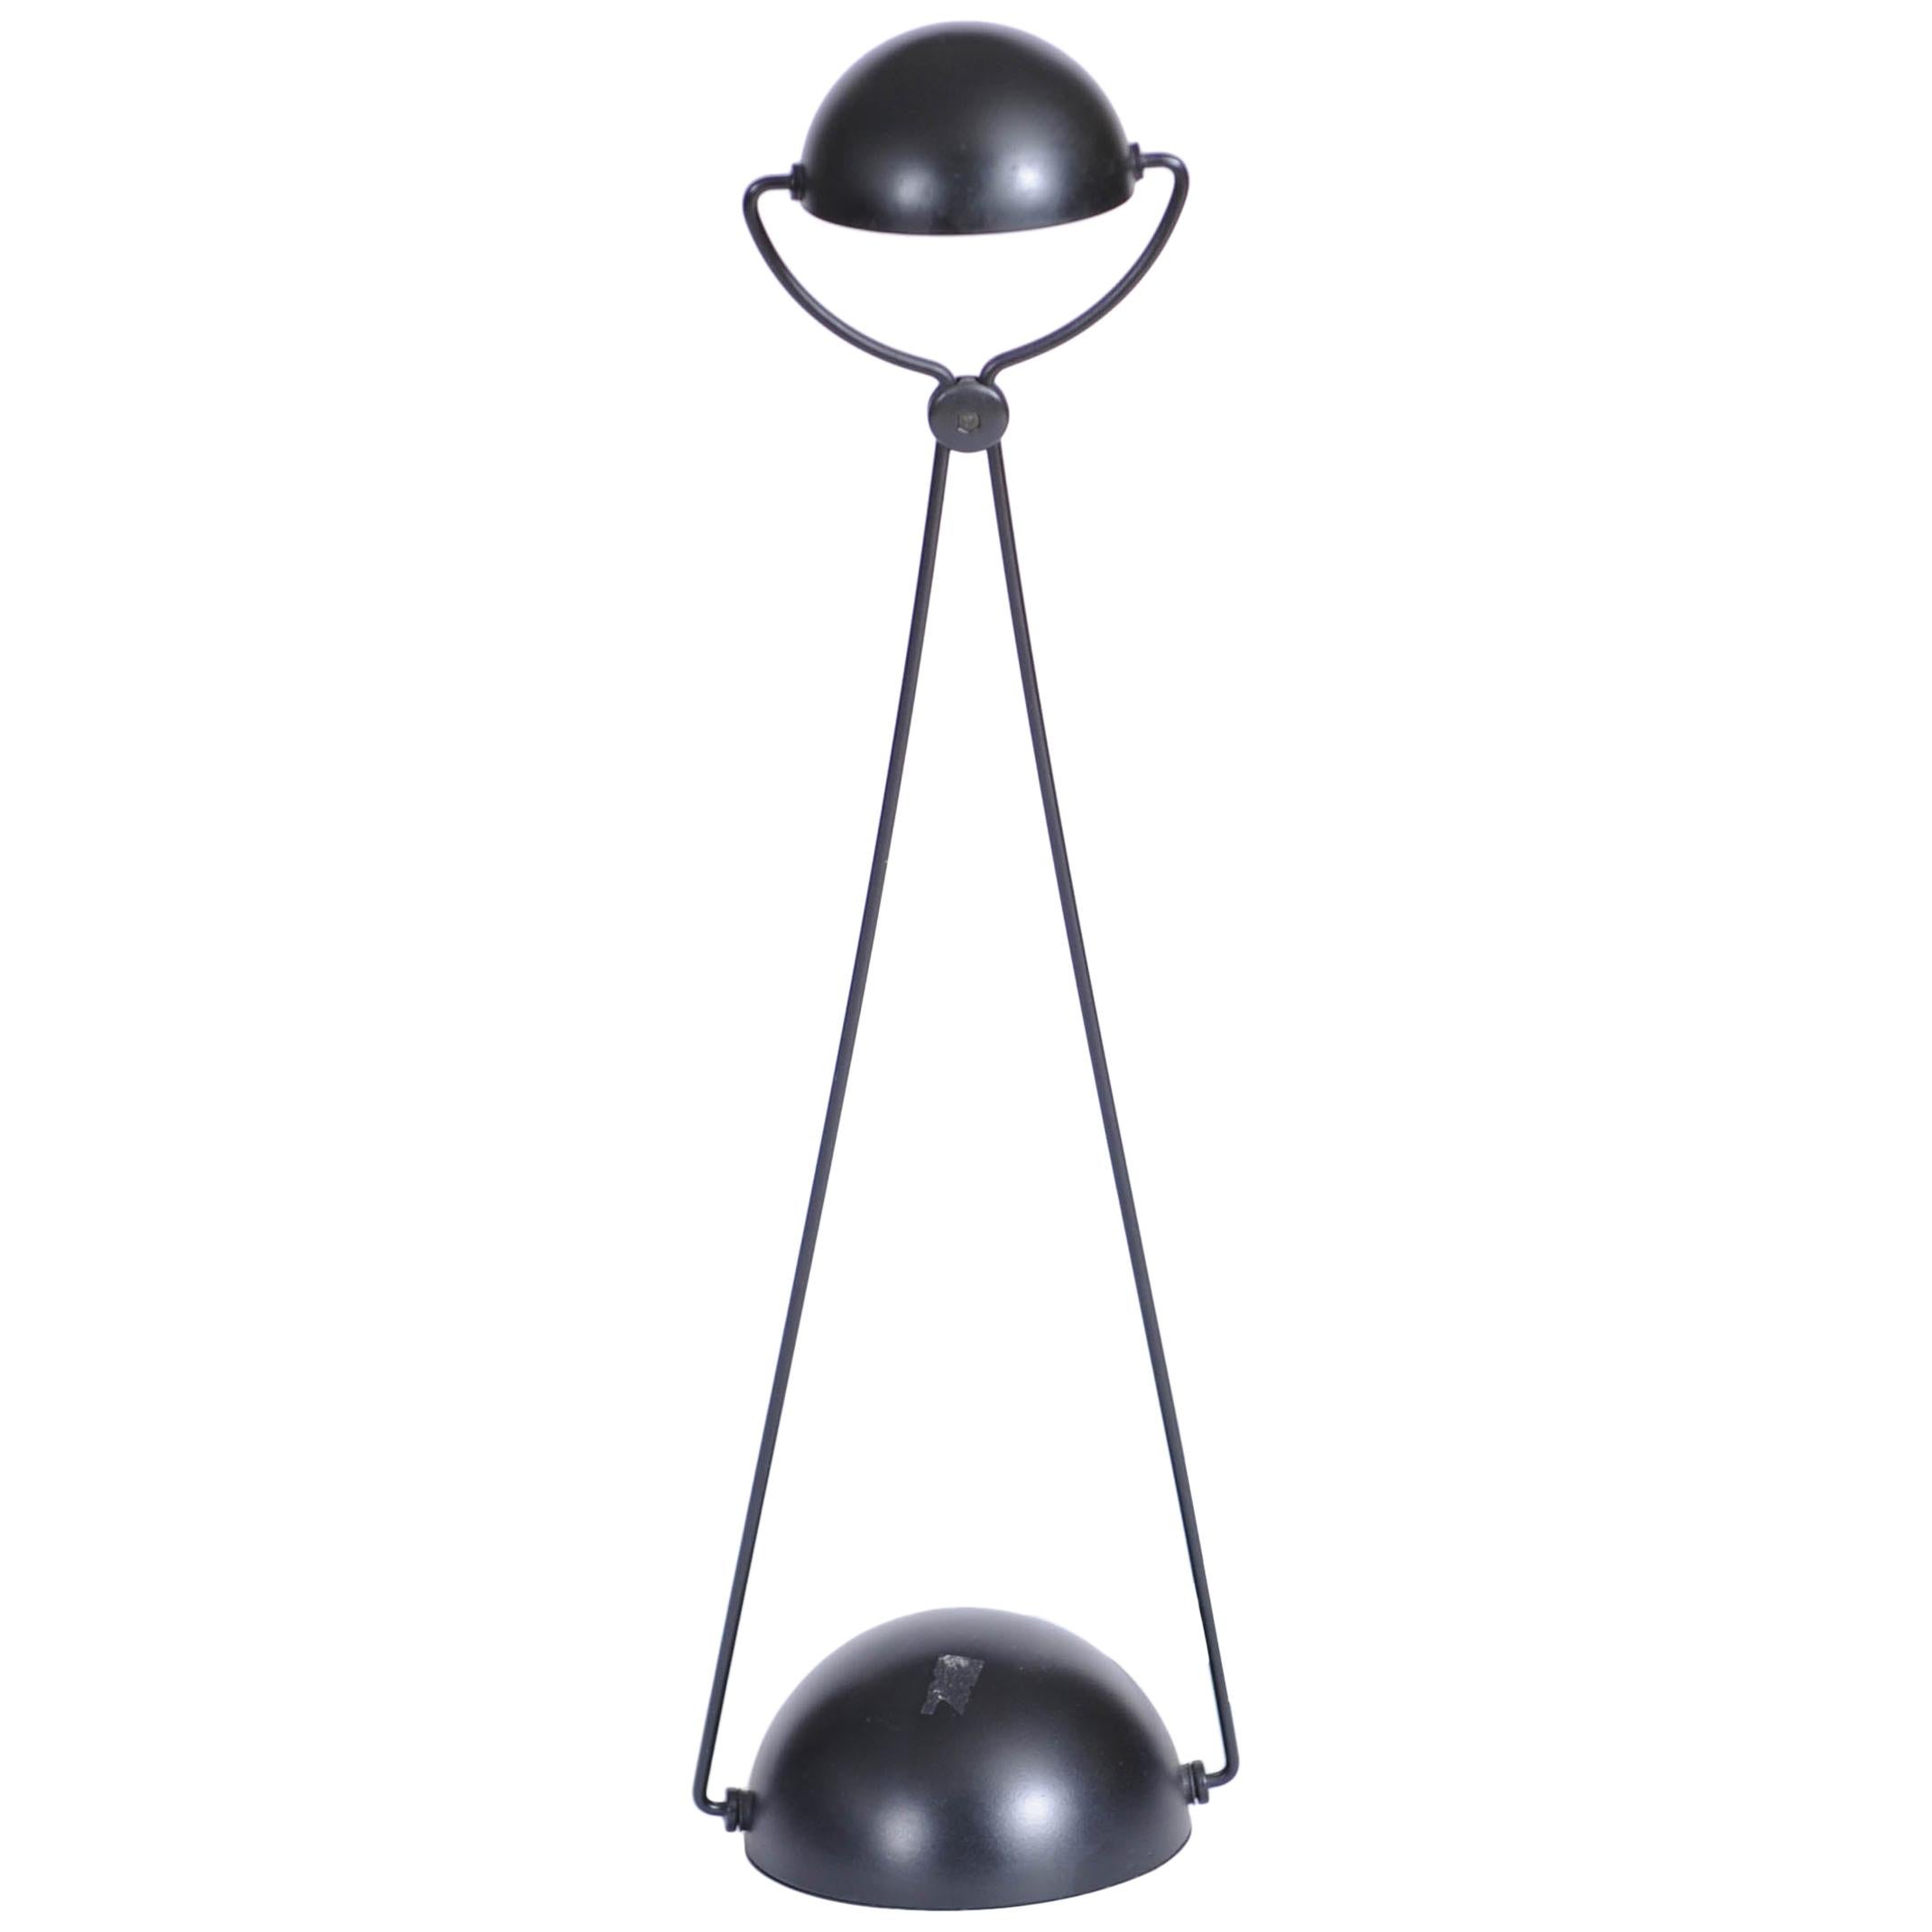 Postmodern Table or Desk Lamp Meridiana by Paolo Piva for Stefano Cevoli